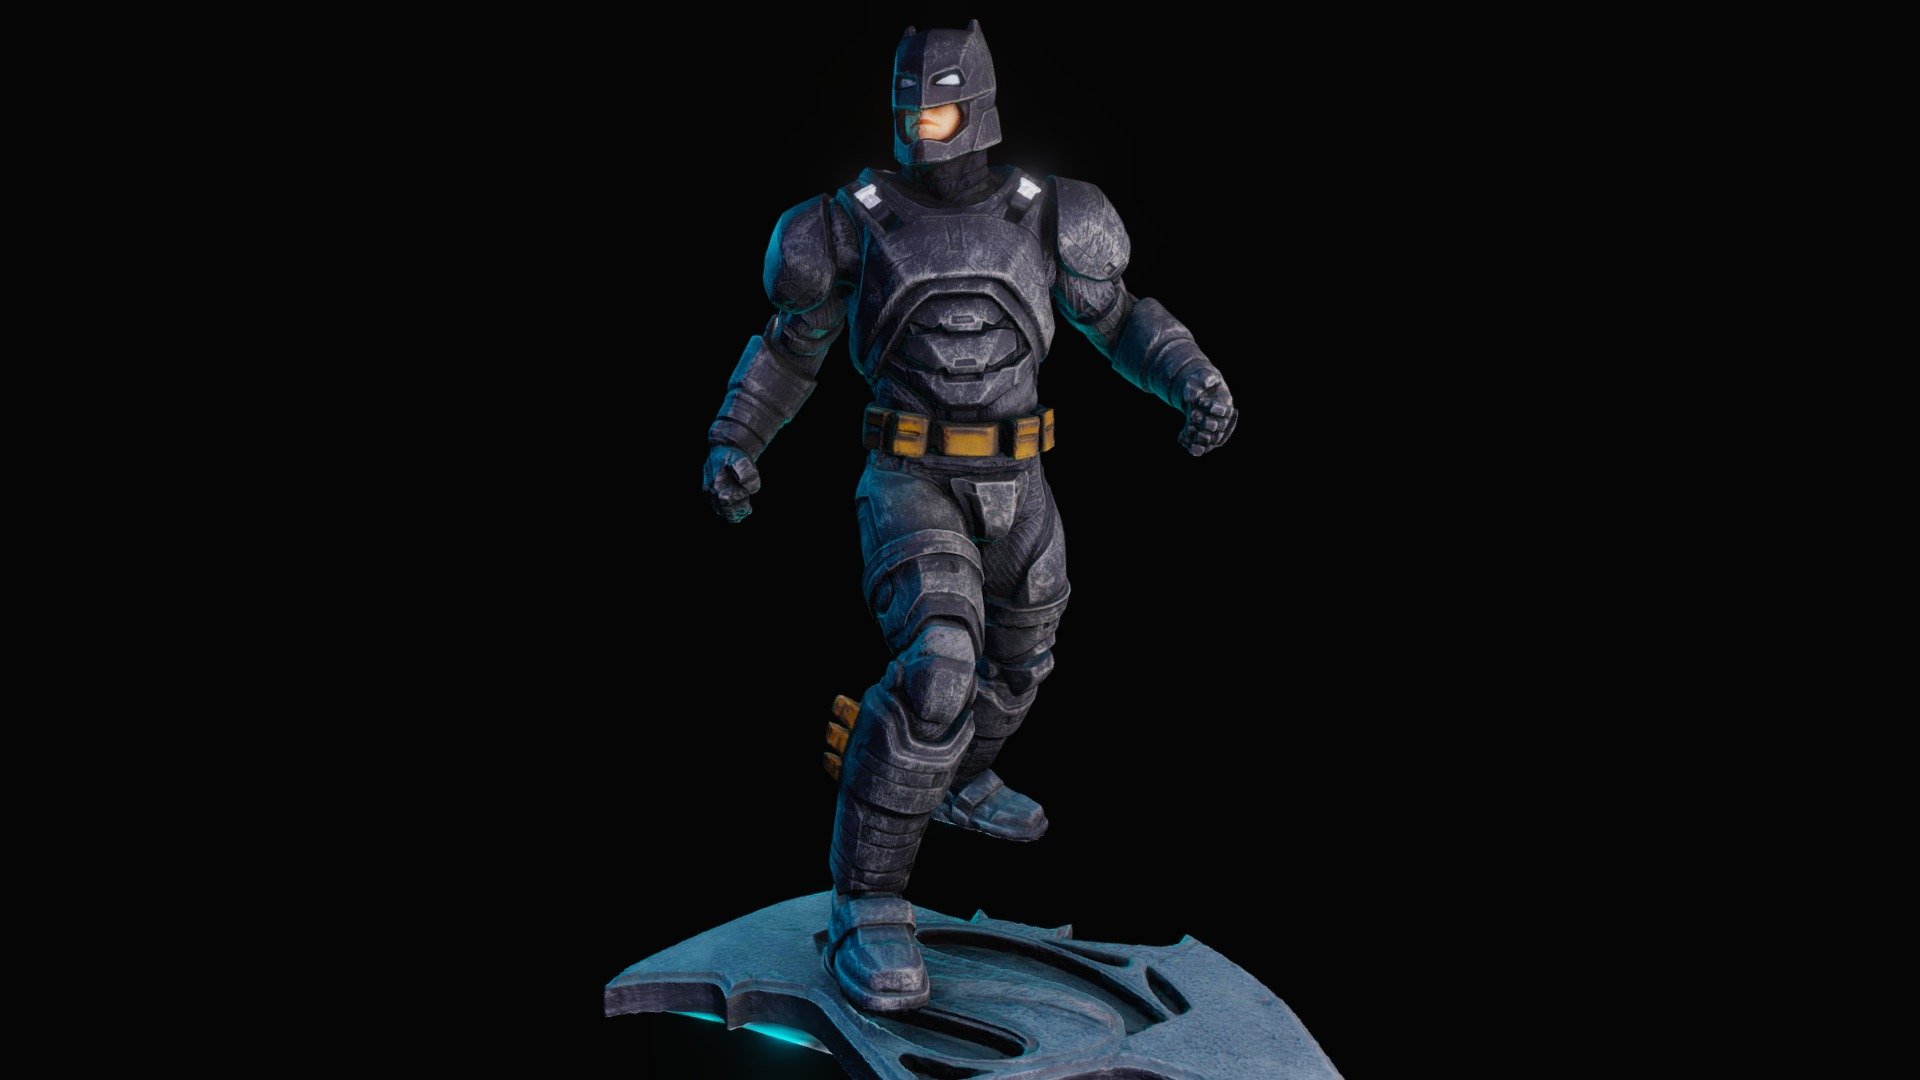 Crazy Toys - Batman armored

Created in Reality Capture capturing reality from 213 images. 
The shooting took place in camera conditions using a Canon EOS 5D SR camera and two light sources 3d model